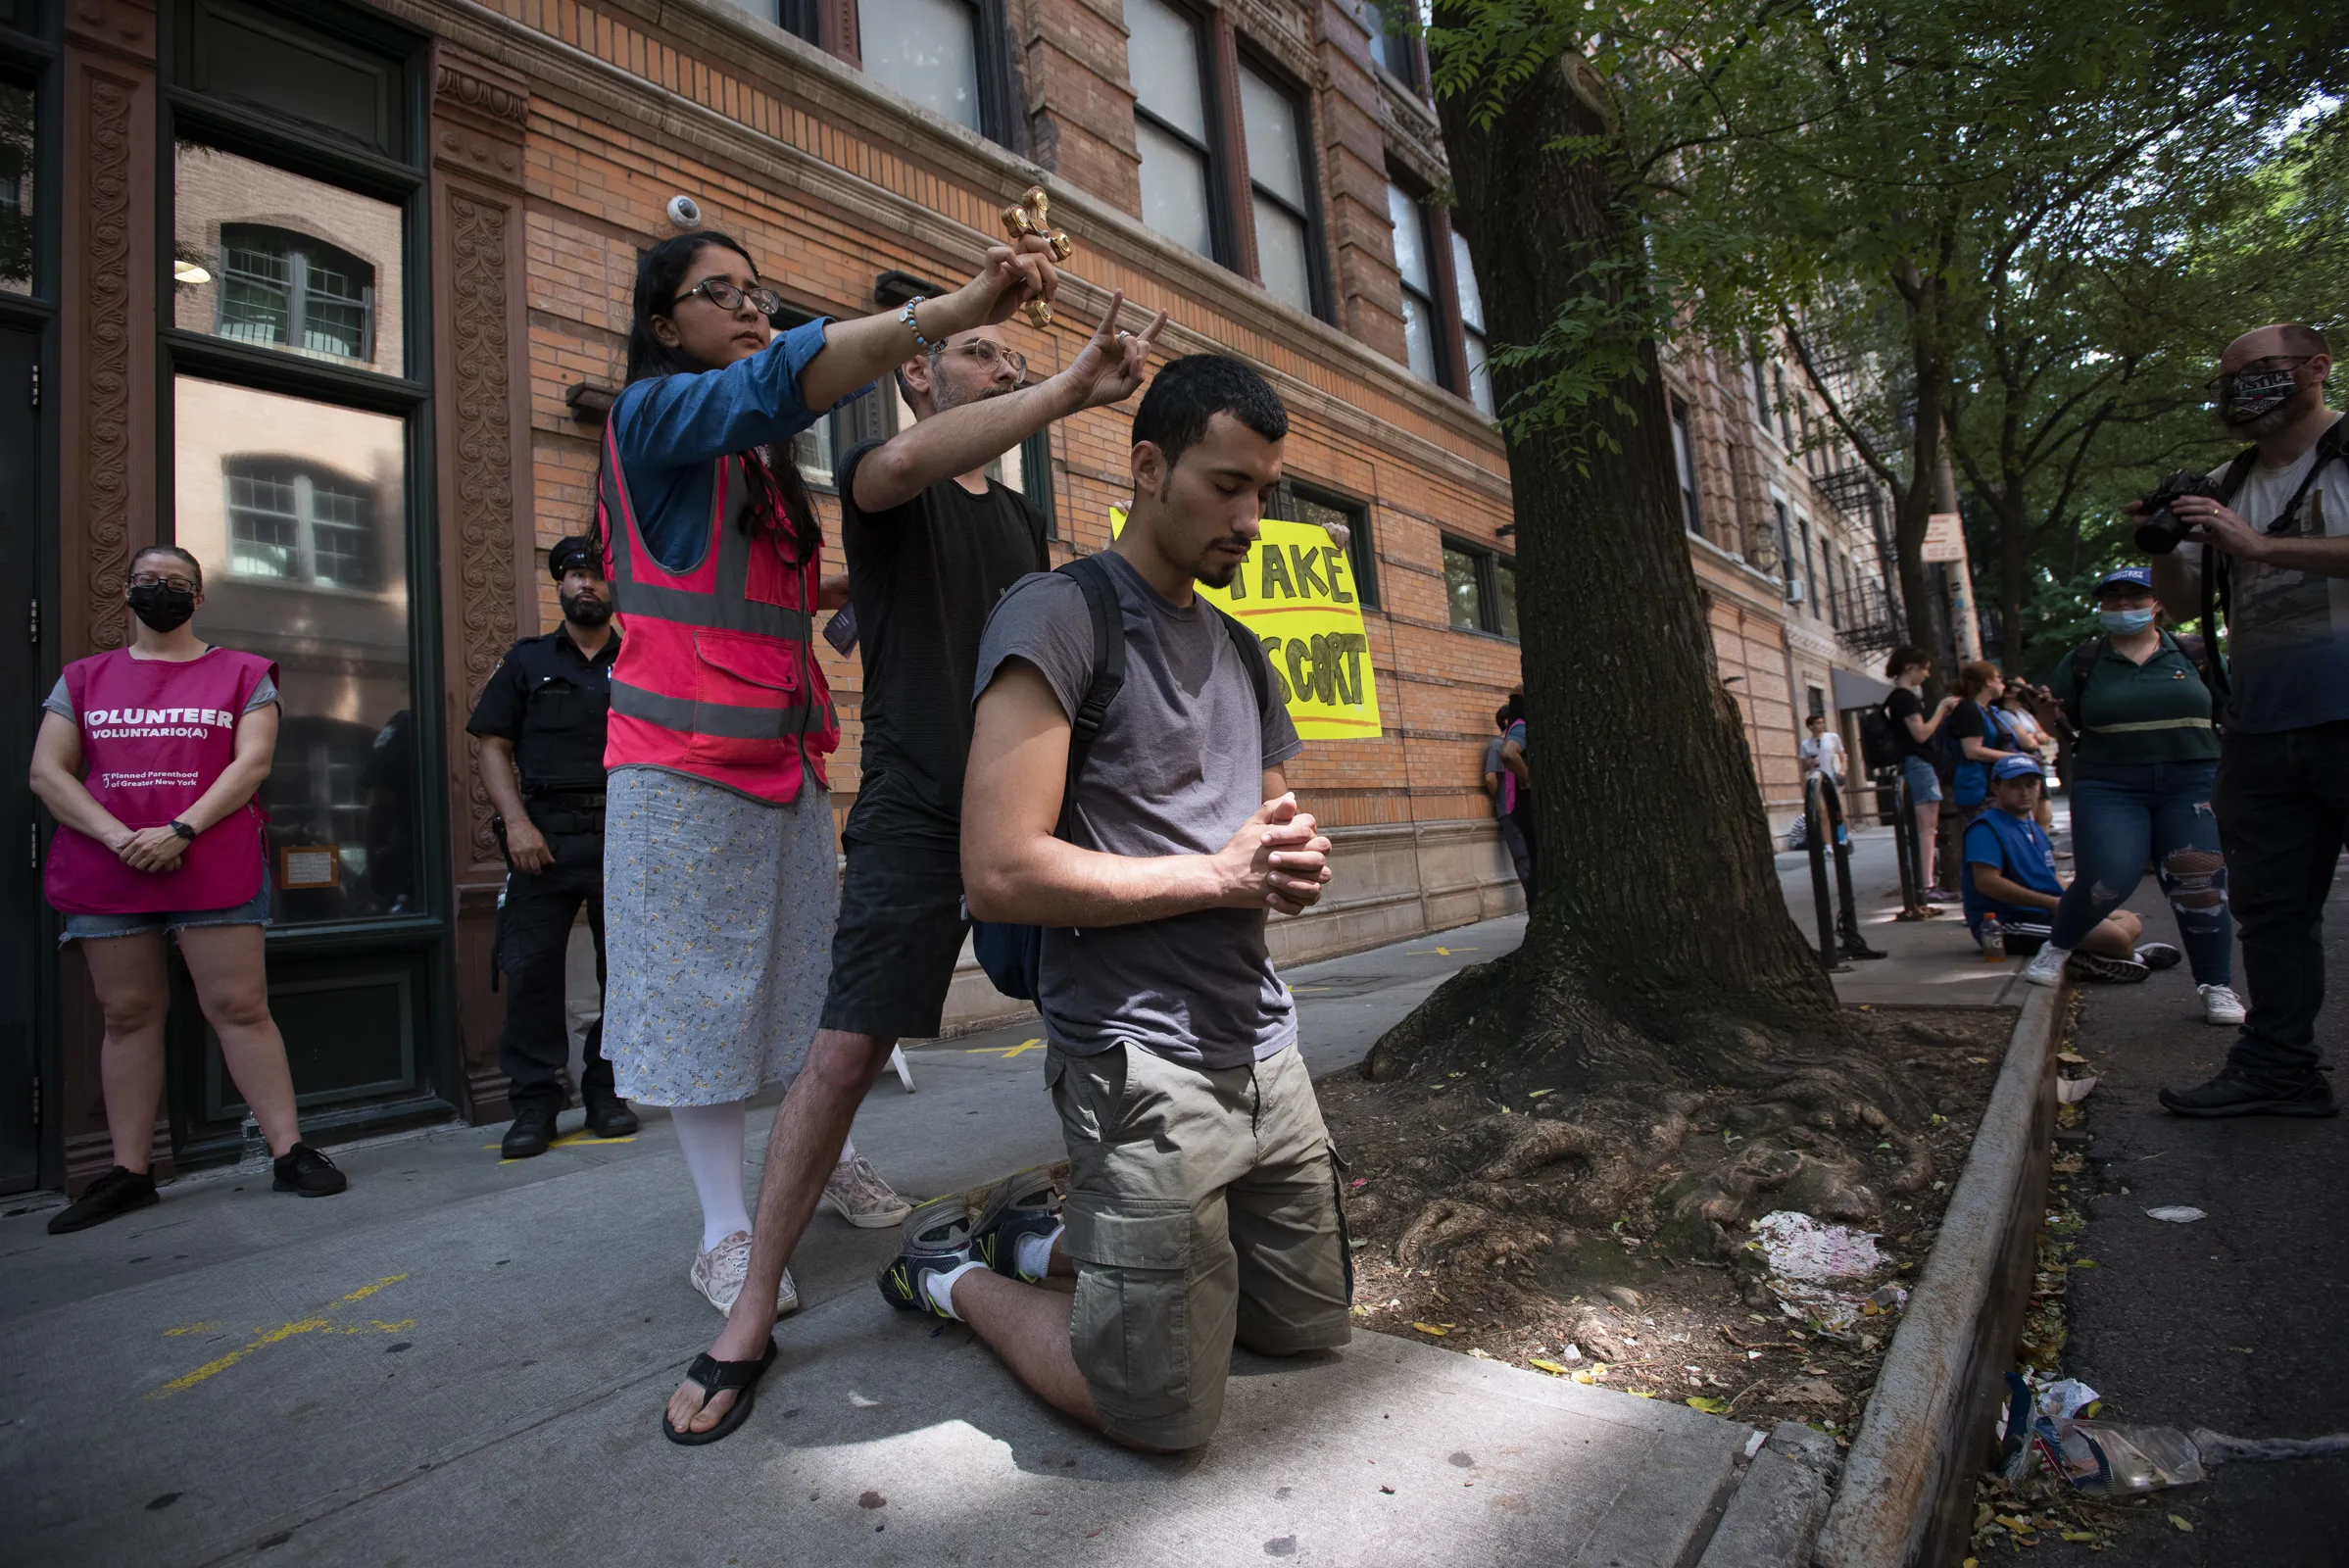 Hundreds of pro-abortion demonstrators tried to block a monthly pro-life march and prayer vigil at a Planned Parenthood abortion clinic in Lower Manhattan on July 2, 2022, setting off a tense confrontation. Jeffrey Bruno/CNA